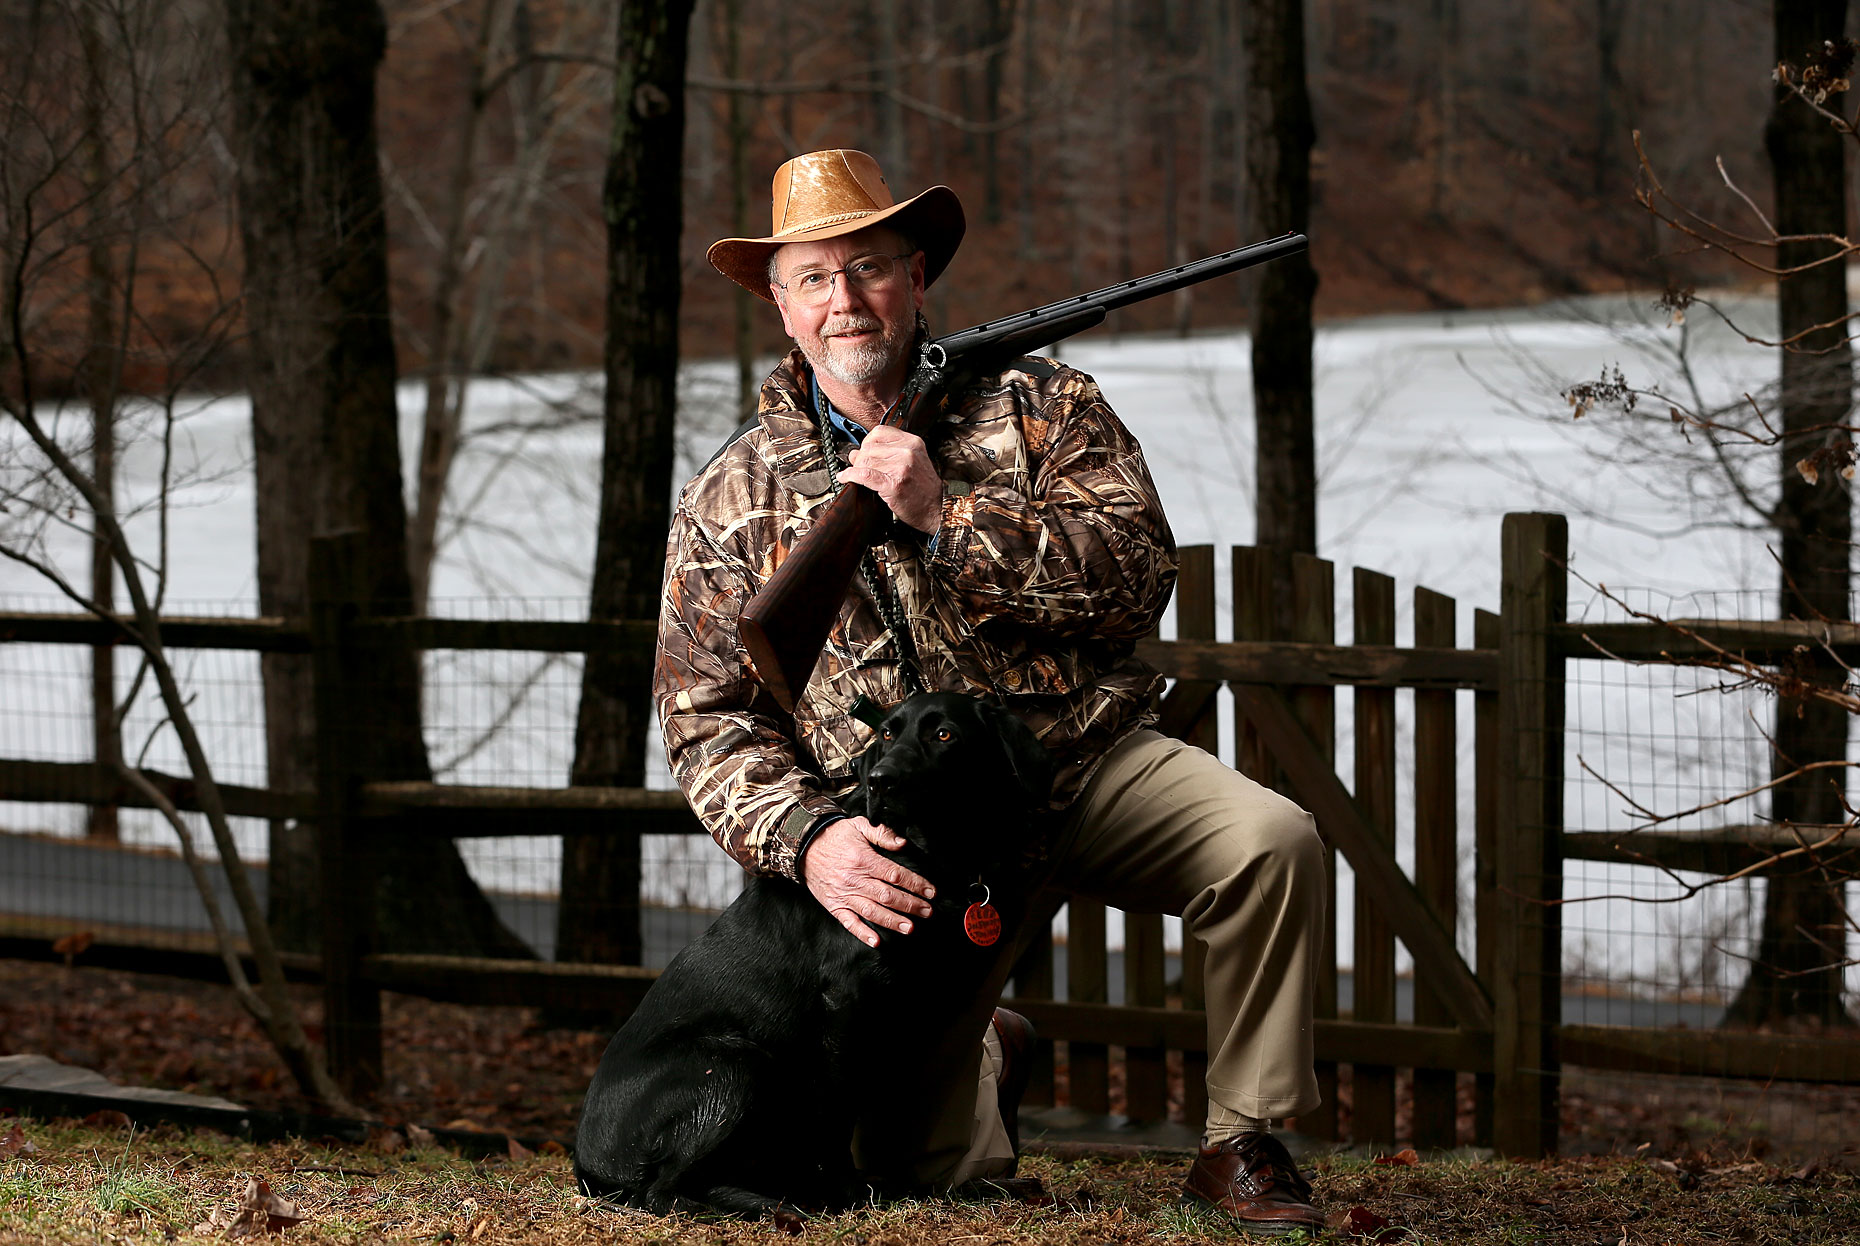 Tom Held poses with his Black Labrador and shotgun during a portrait shoot.